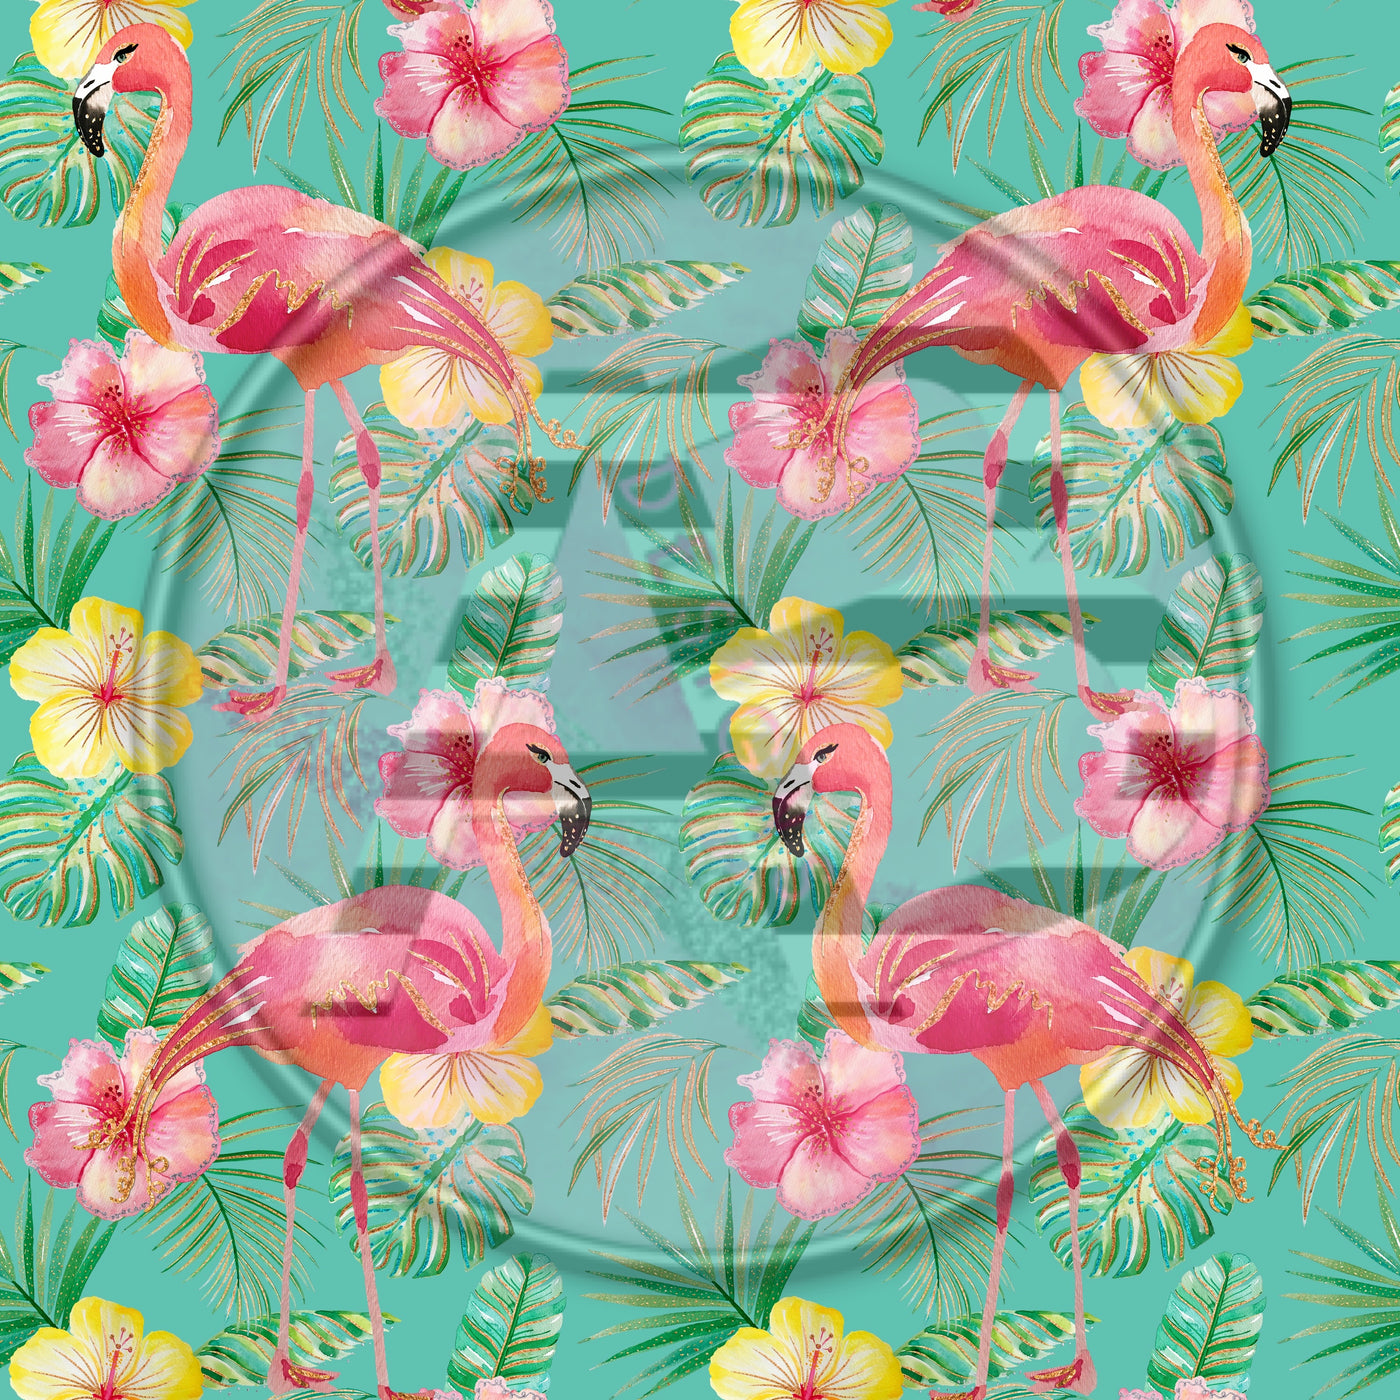 Adhesive Patterned Vinyl - Tropical 707